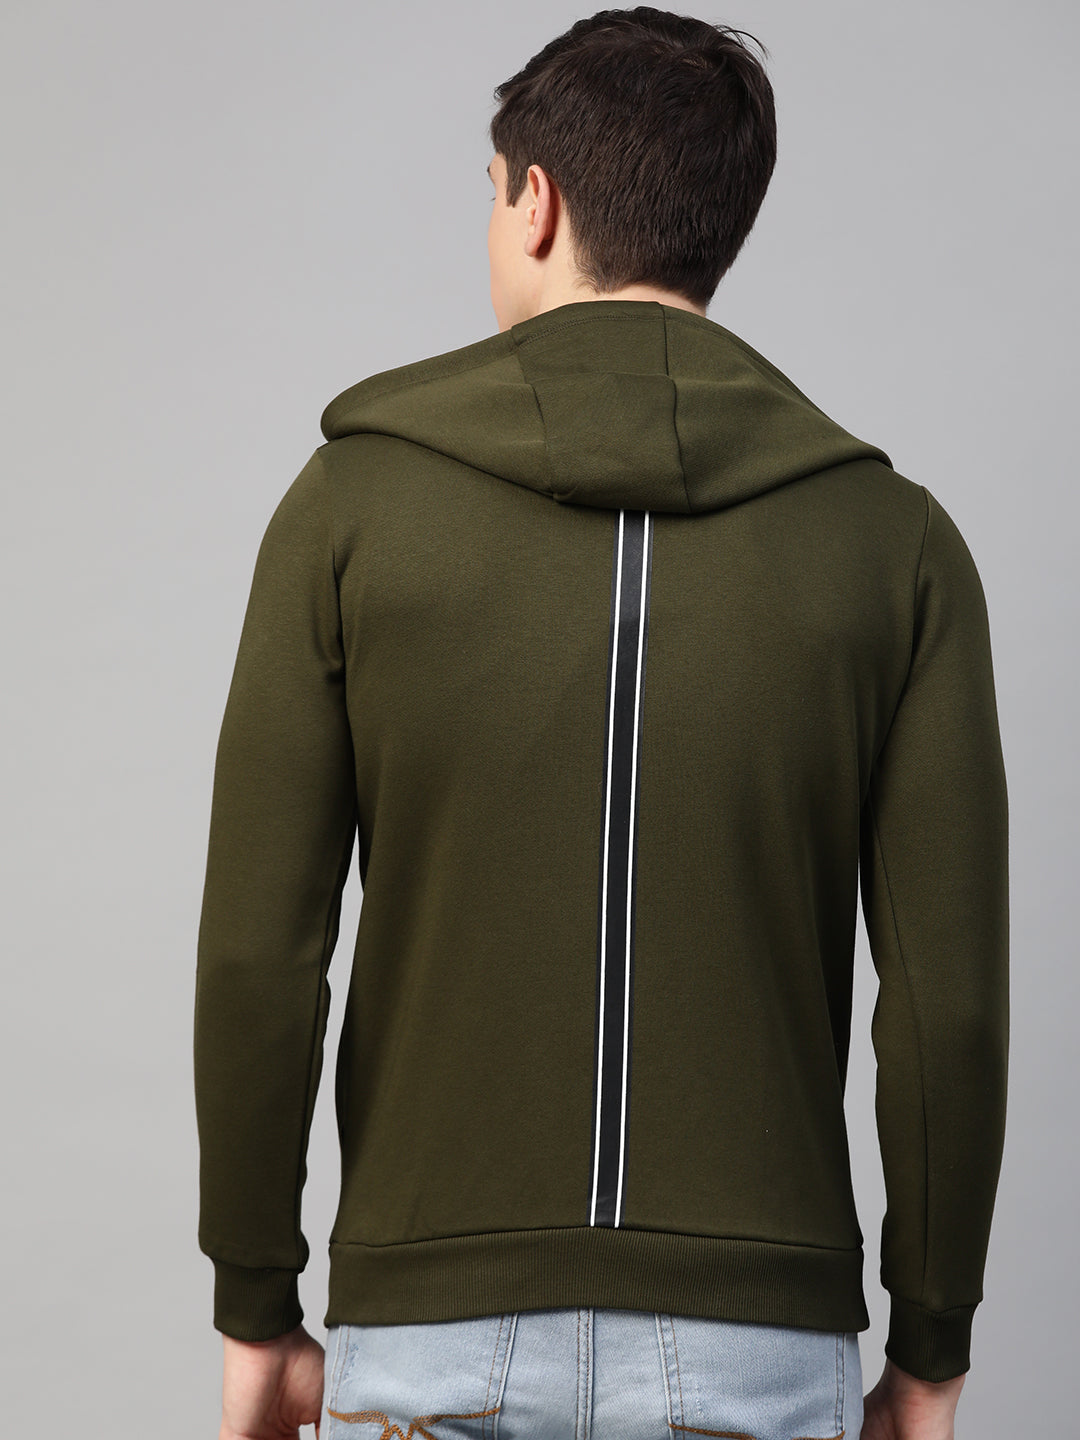 Underjeans By Spykar Olive Cotton Solid Hooded Sweatshirts-Sweatshirts-UnderJeans By Spykar